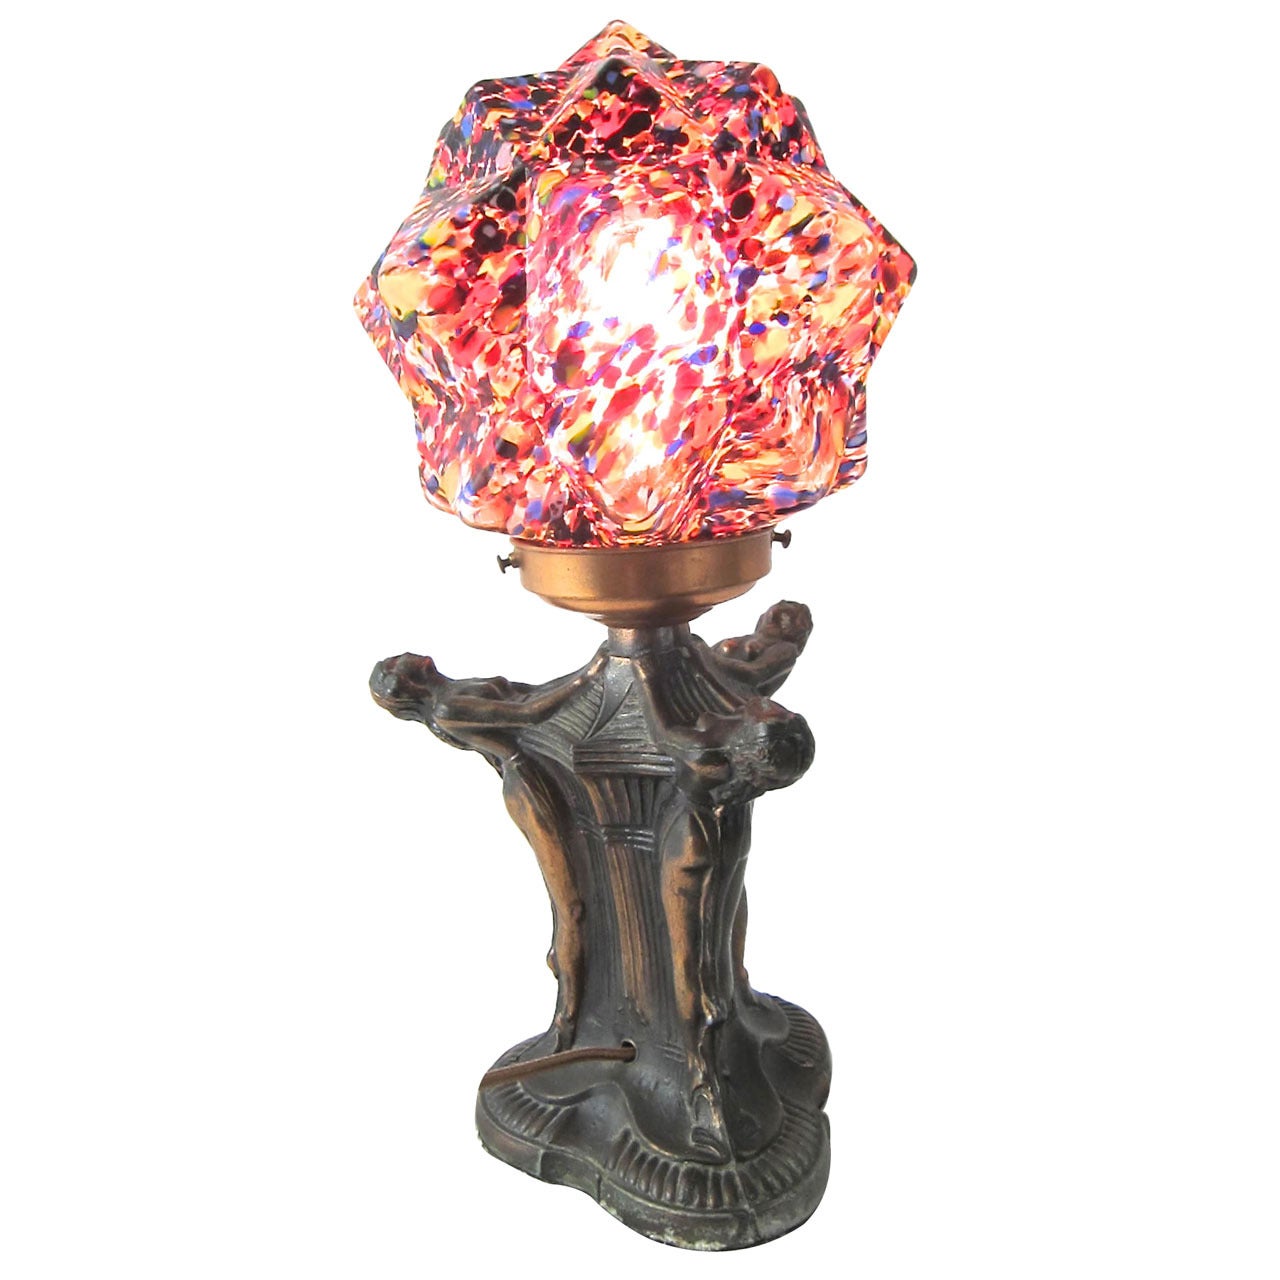 Art Deco Copper Flappers  End Of The Day Starburst Multi-colored Globe Lamp